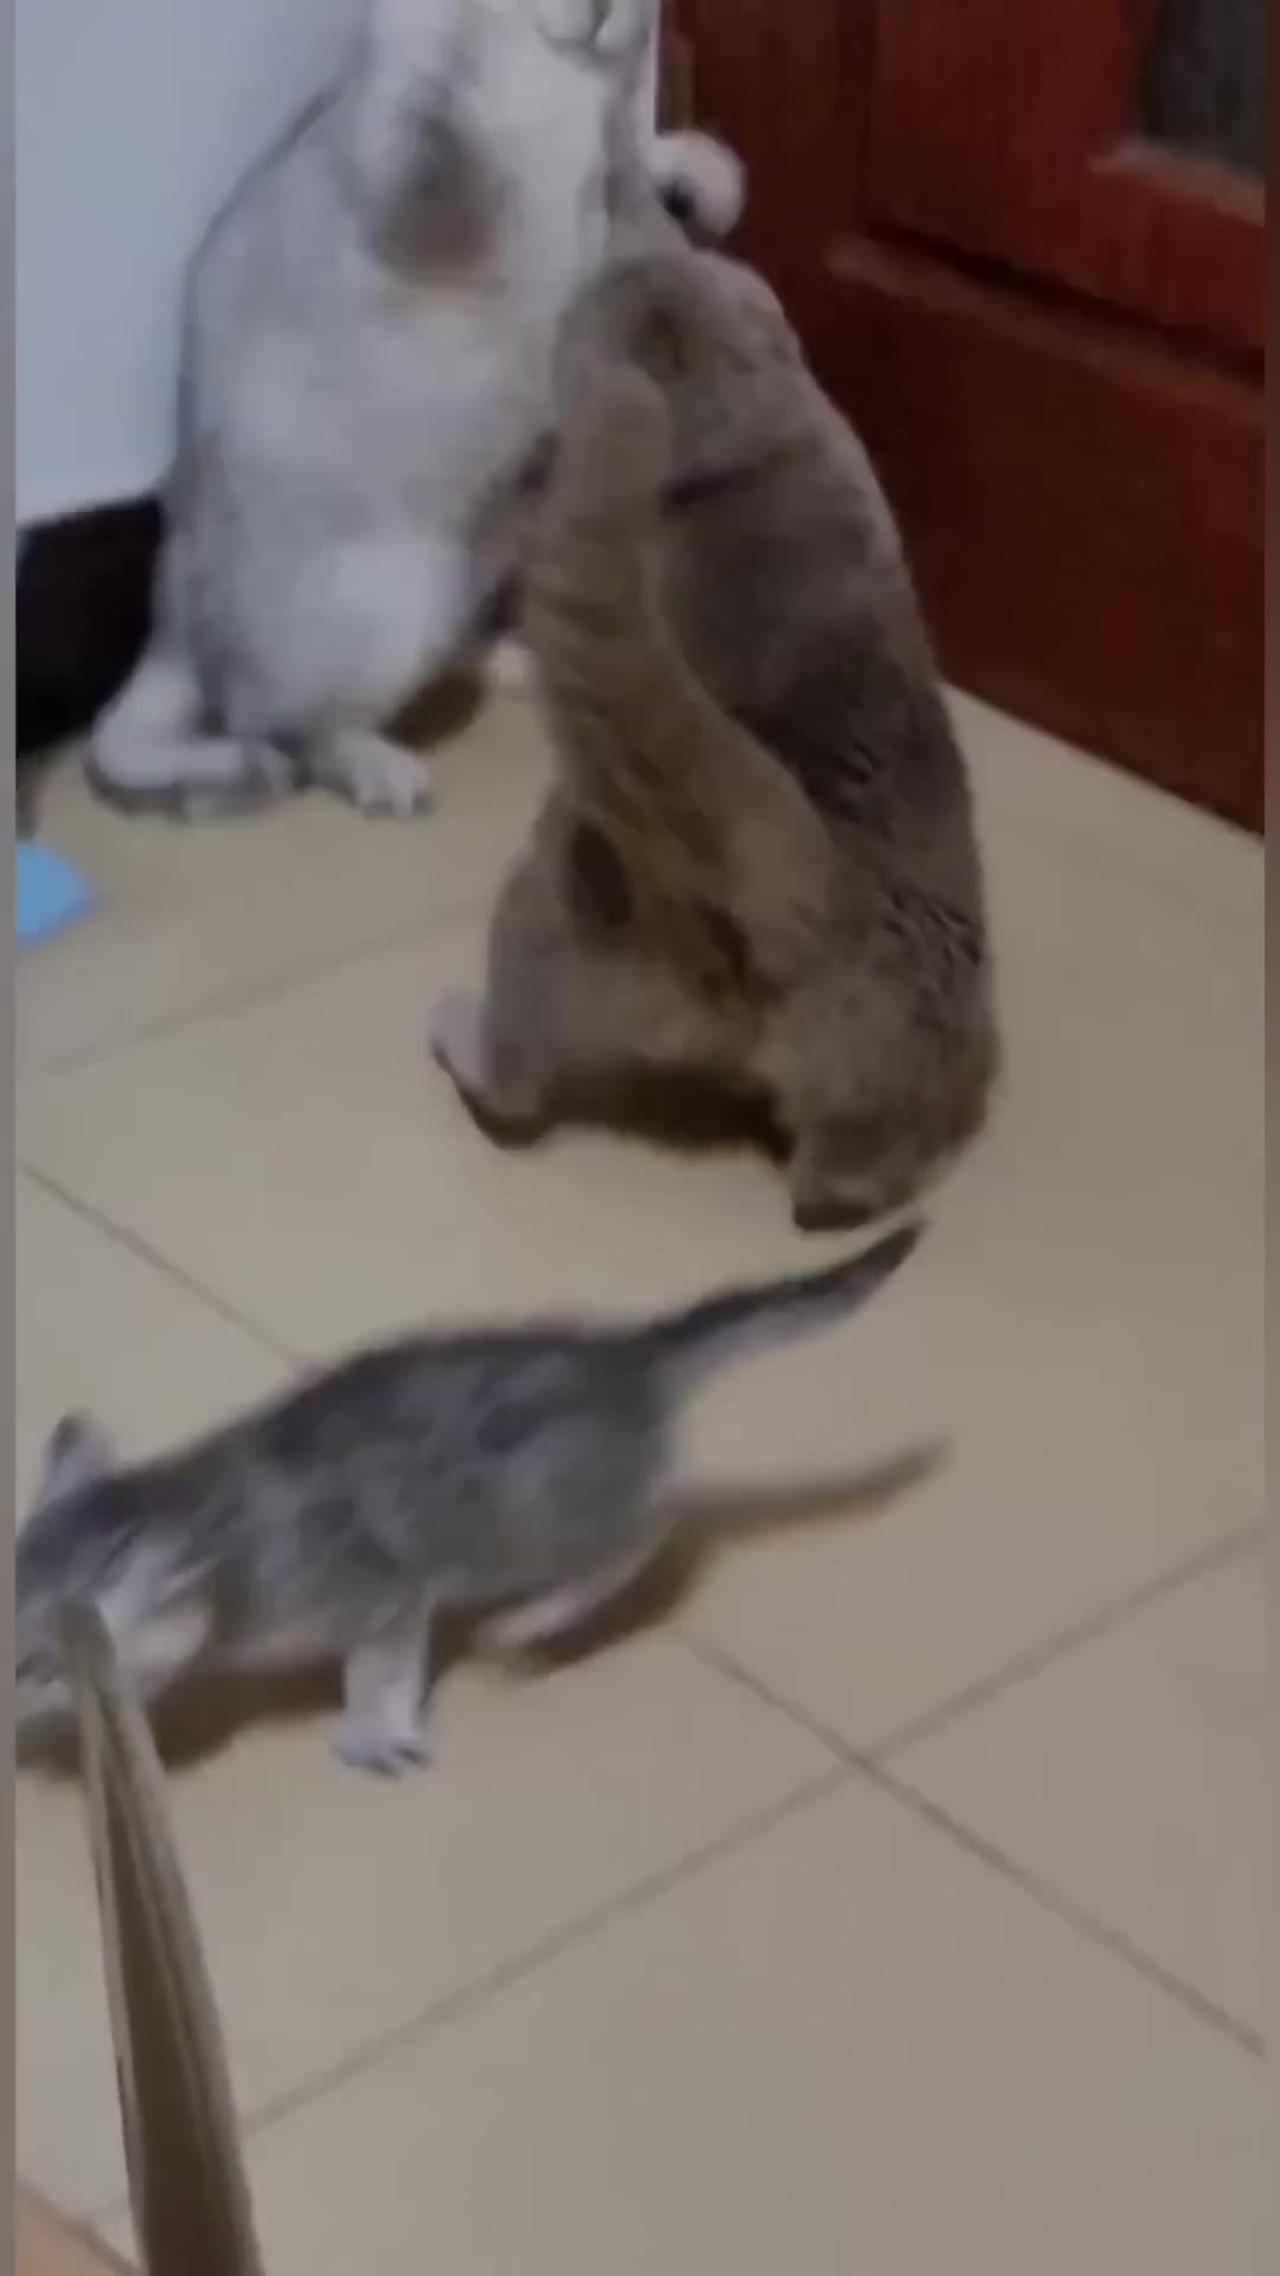 Moments of Funny Animals, Dancing Cat, Playfulness of Animals. 😍😂